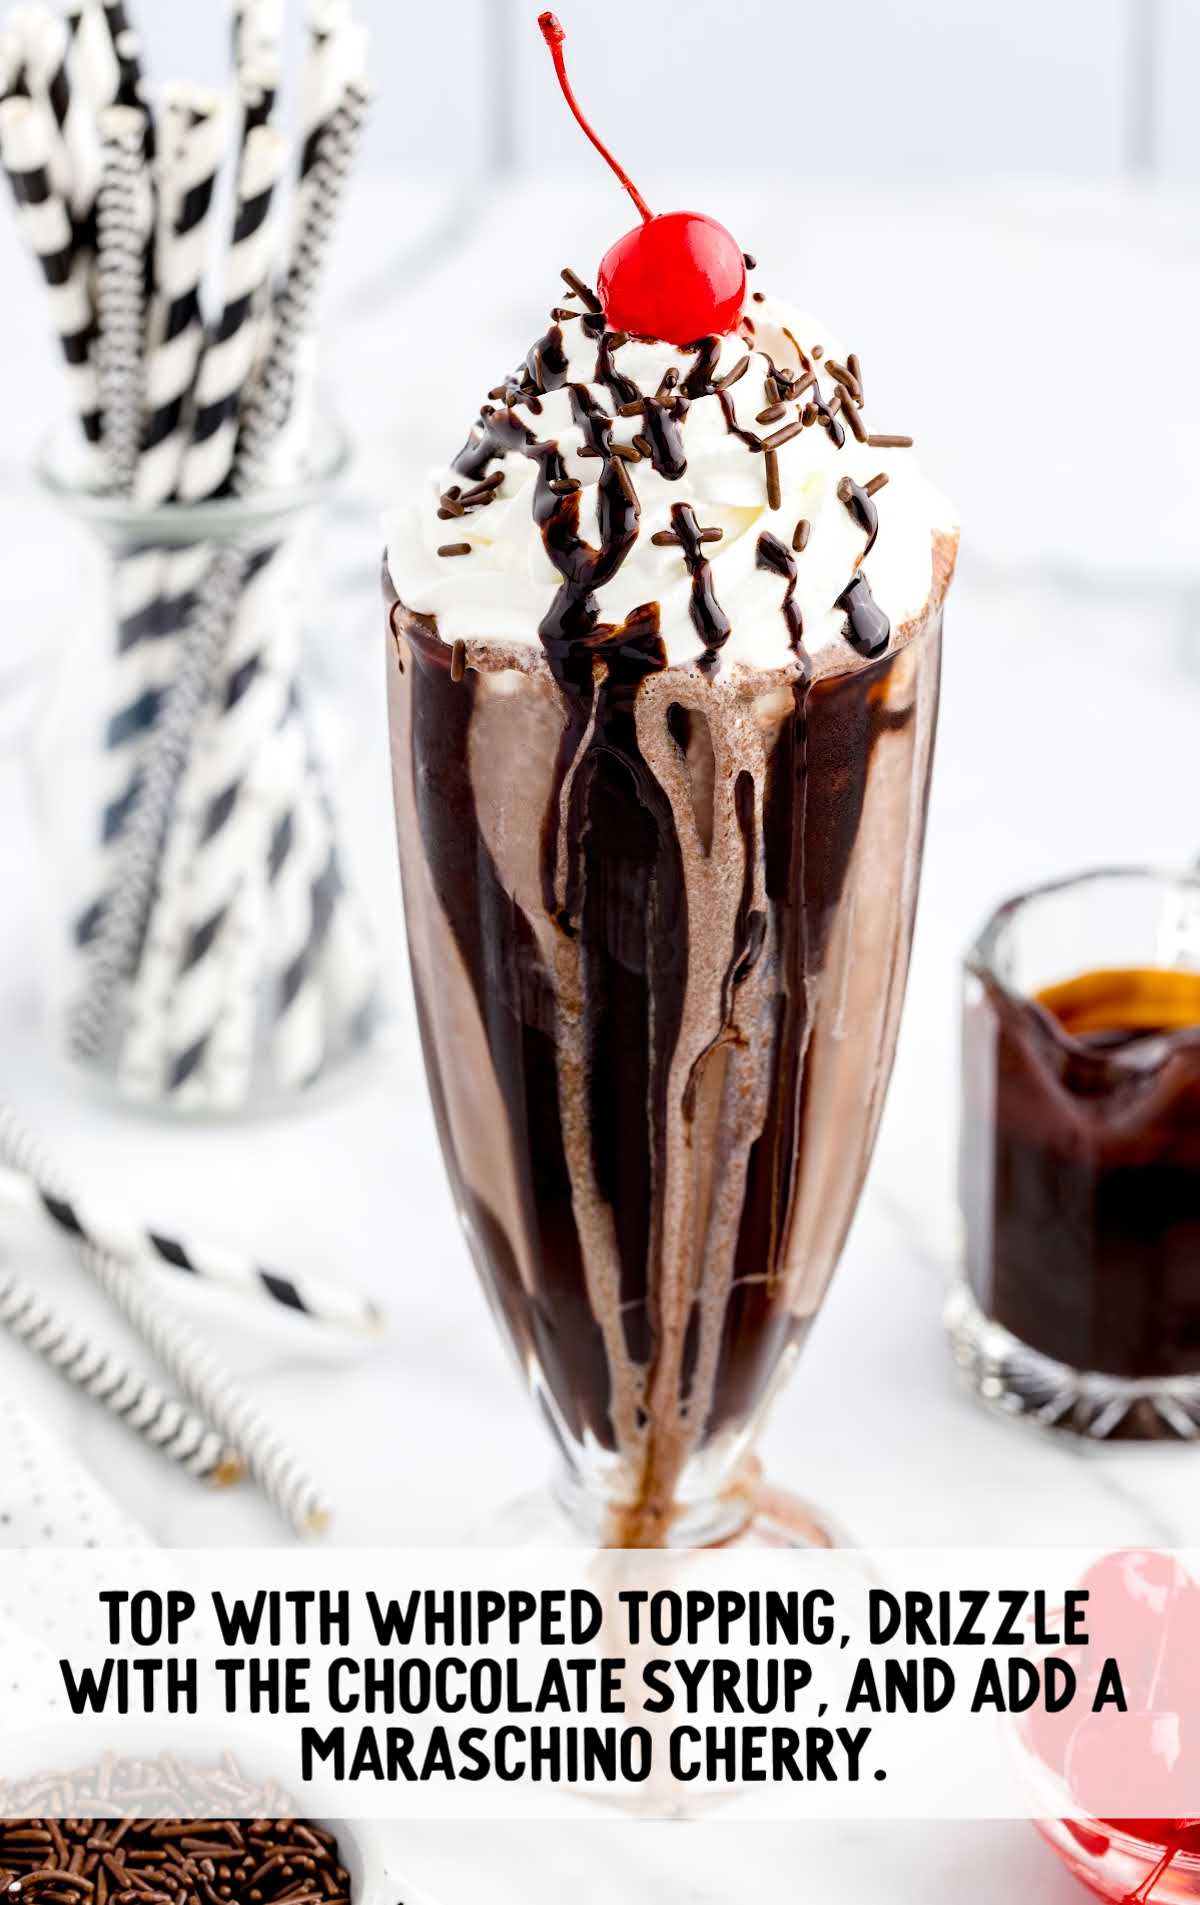  a tall glass topped with whipped cream then garnished with Hershey bars, a cherry, chocolate sprinkles, and chocolate syrup